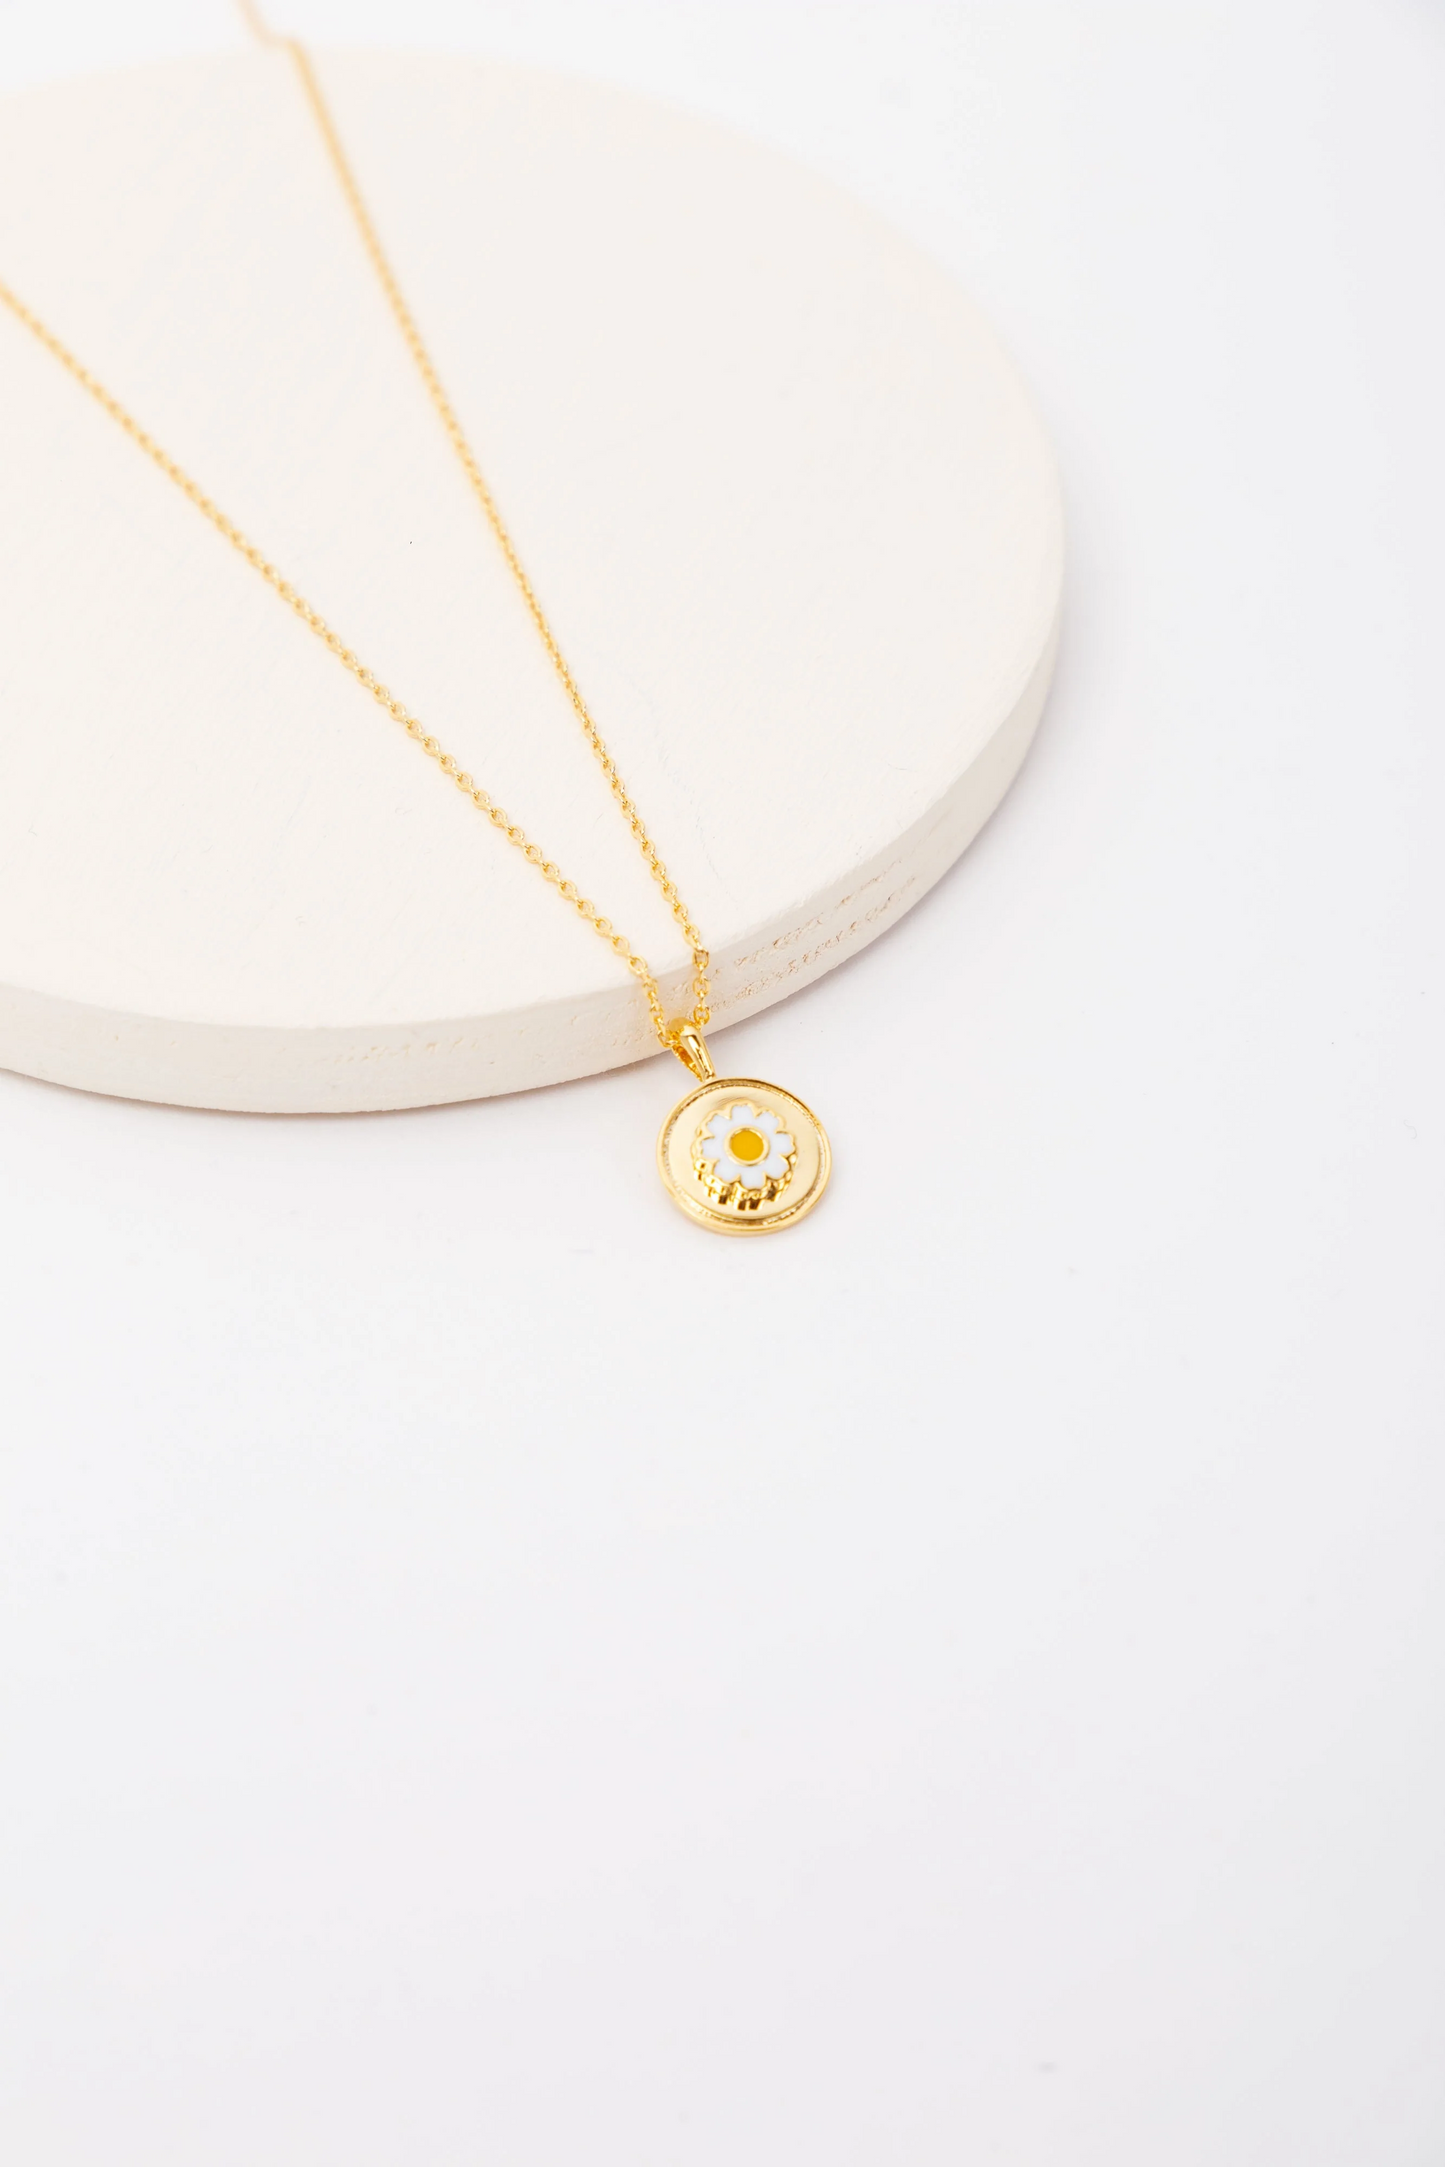 Cove Daisy Gold Necklace